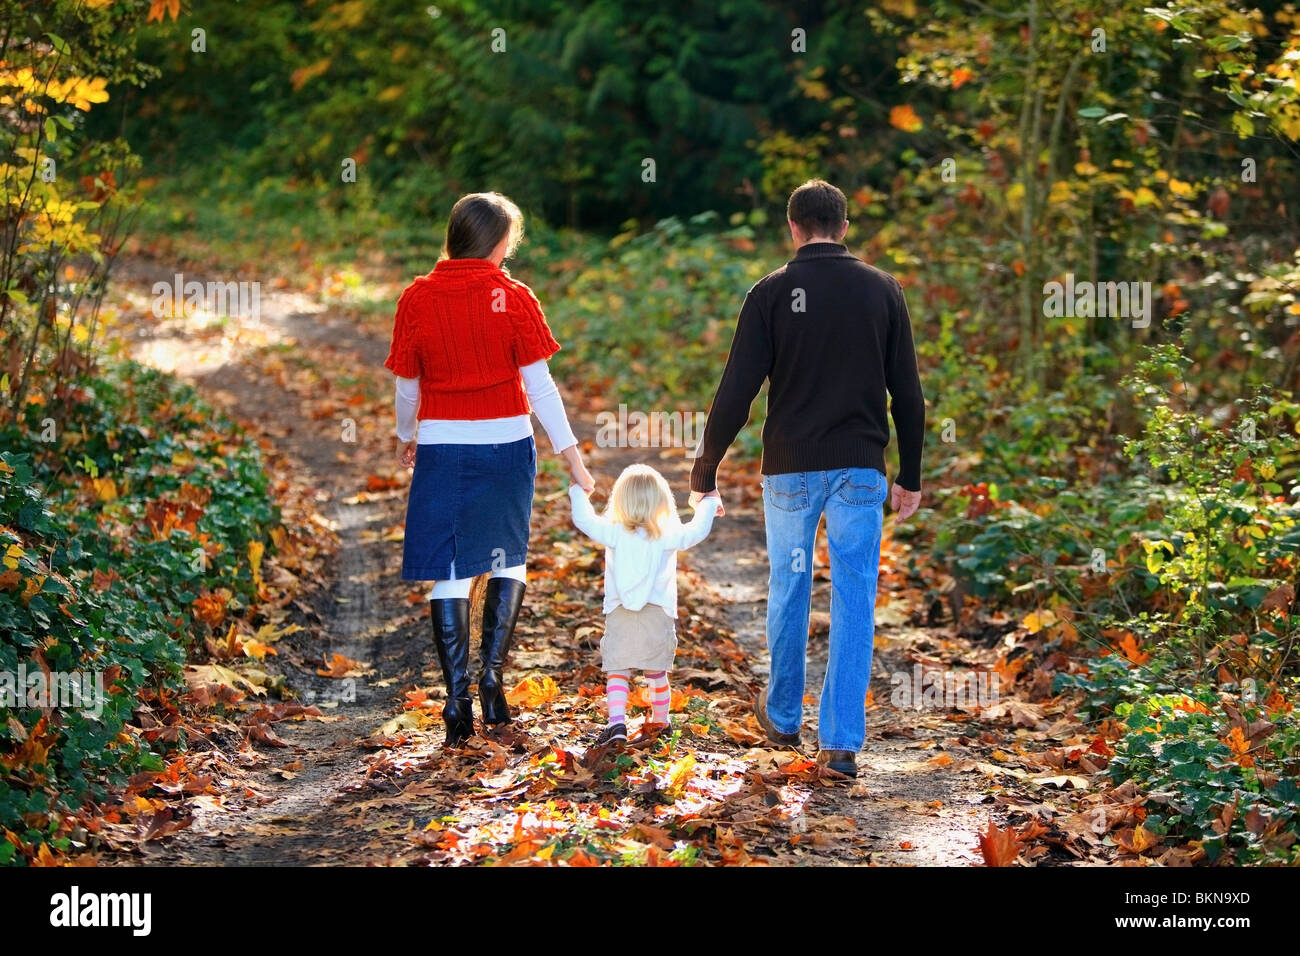 A Family Walking Down A Path In Autumn Stock Photo